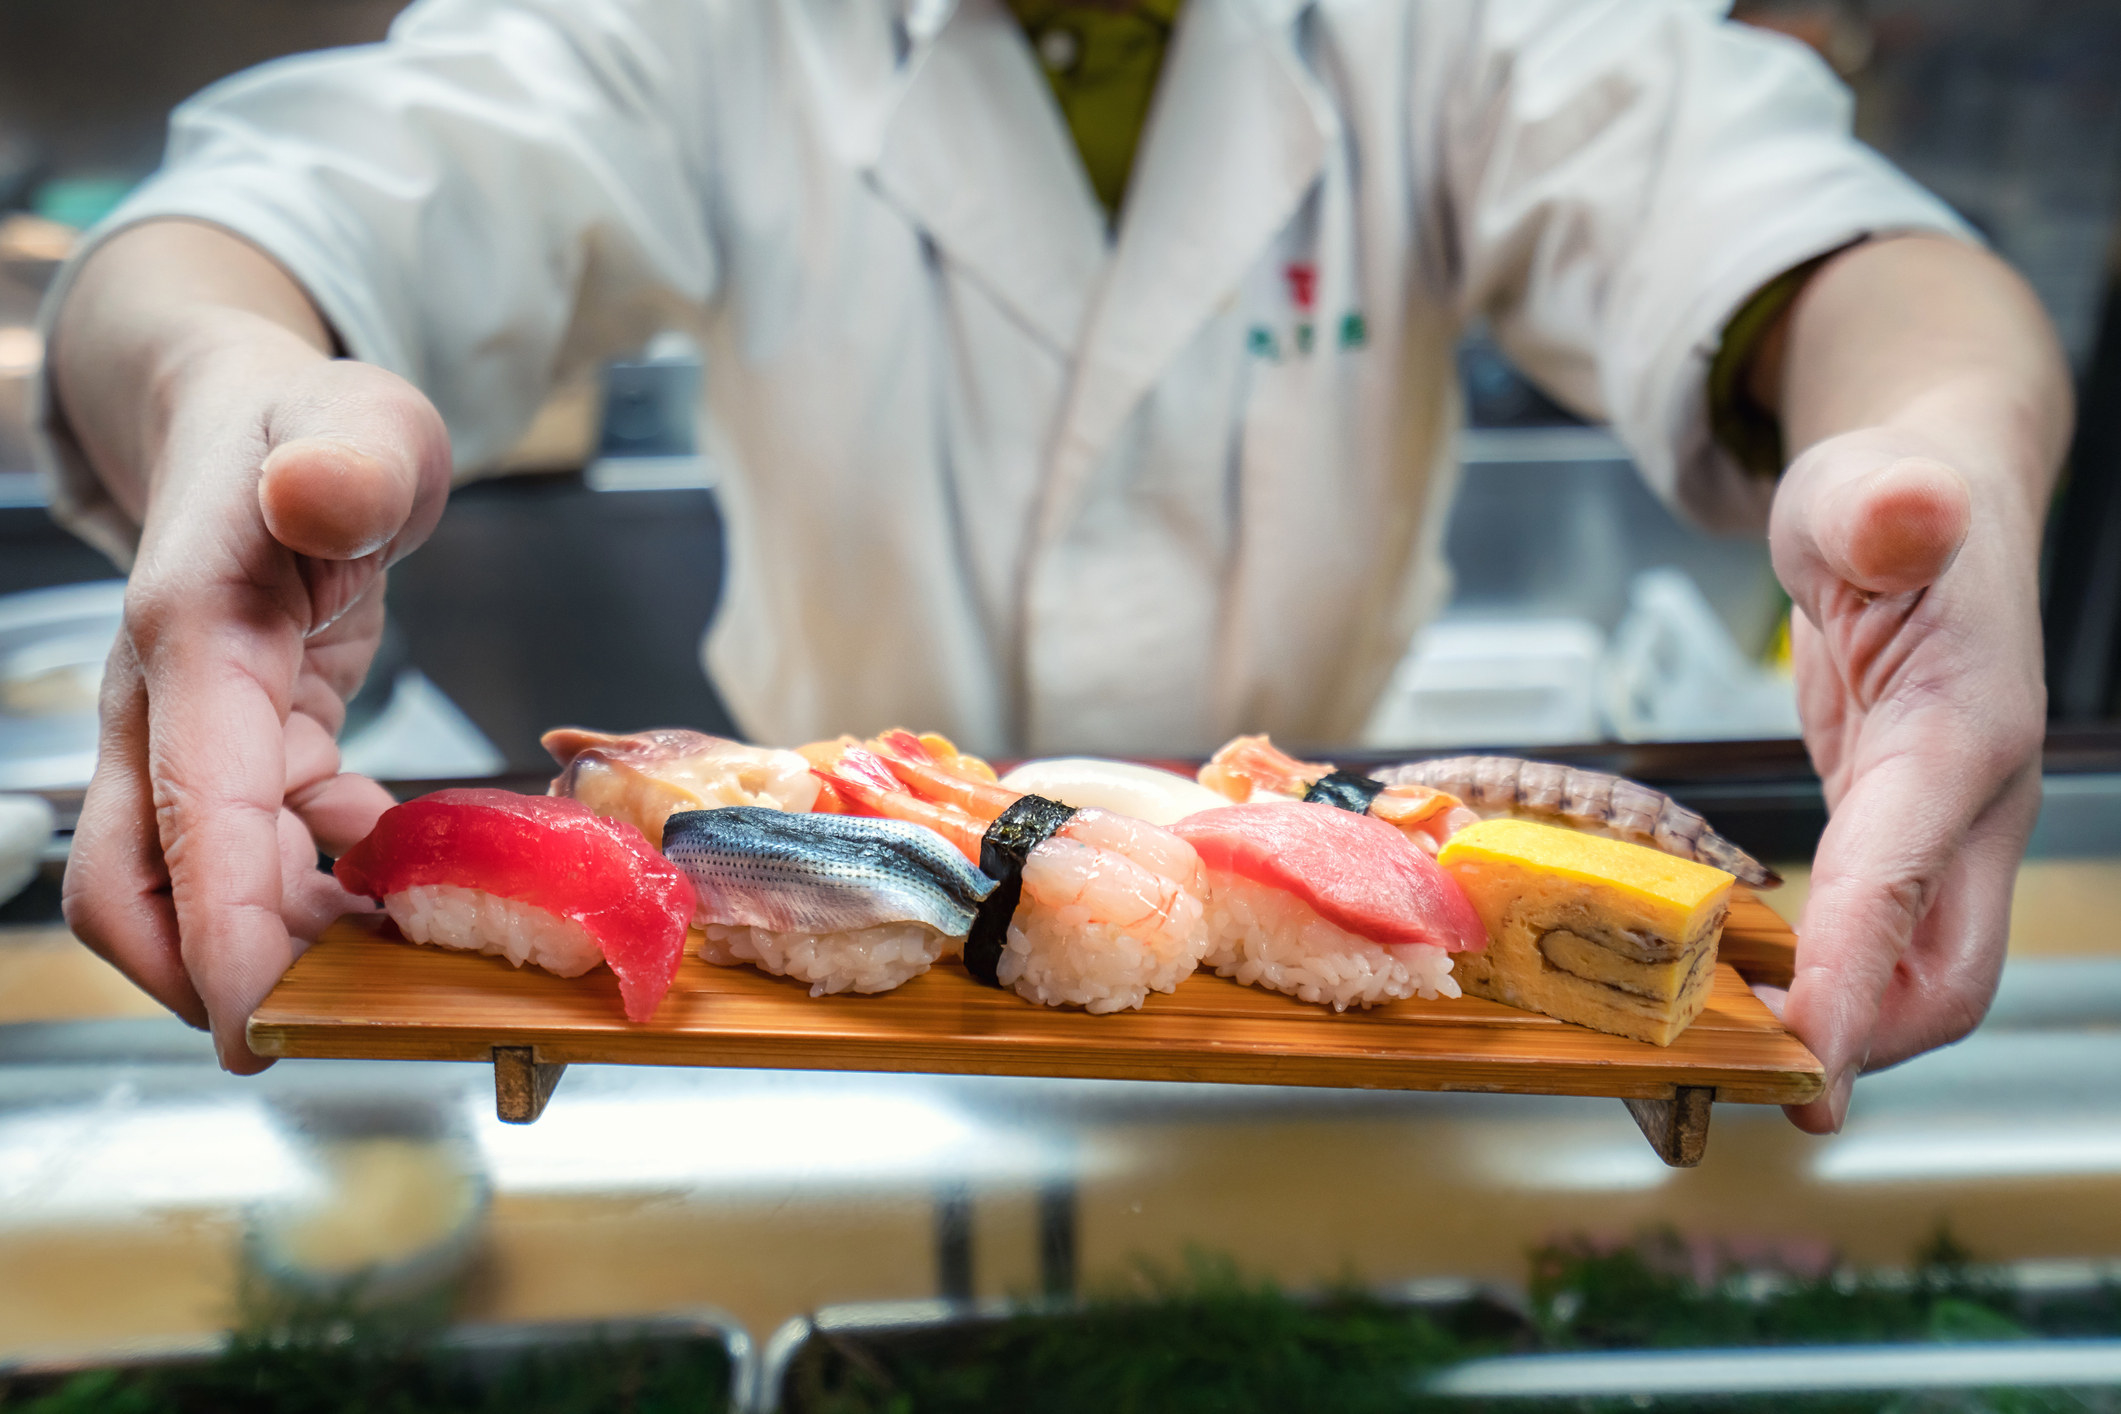 Male chef holding a plate full of sushi at the kitchen.